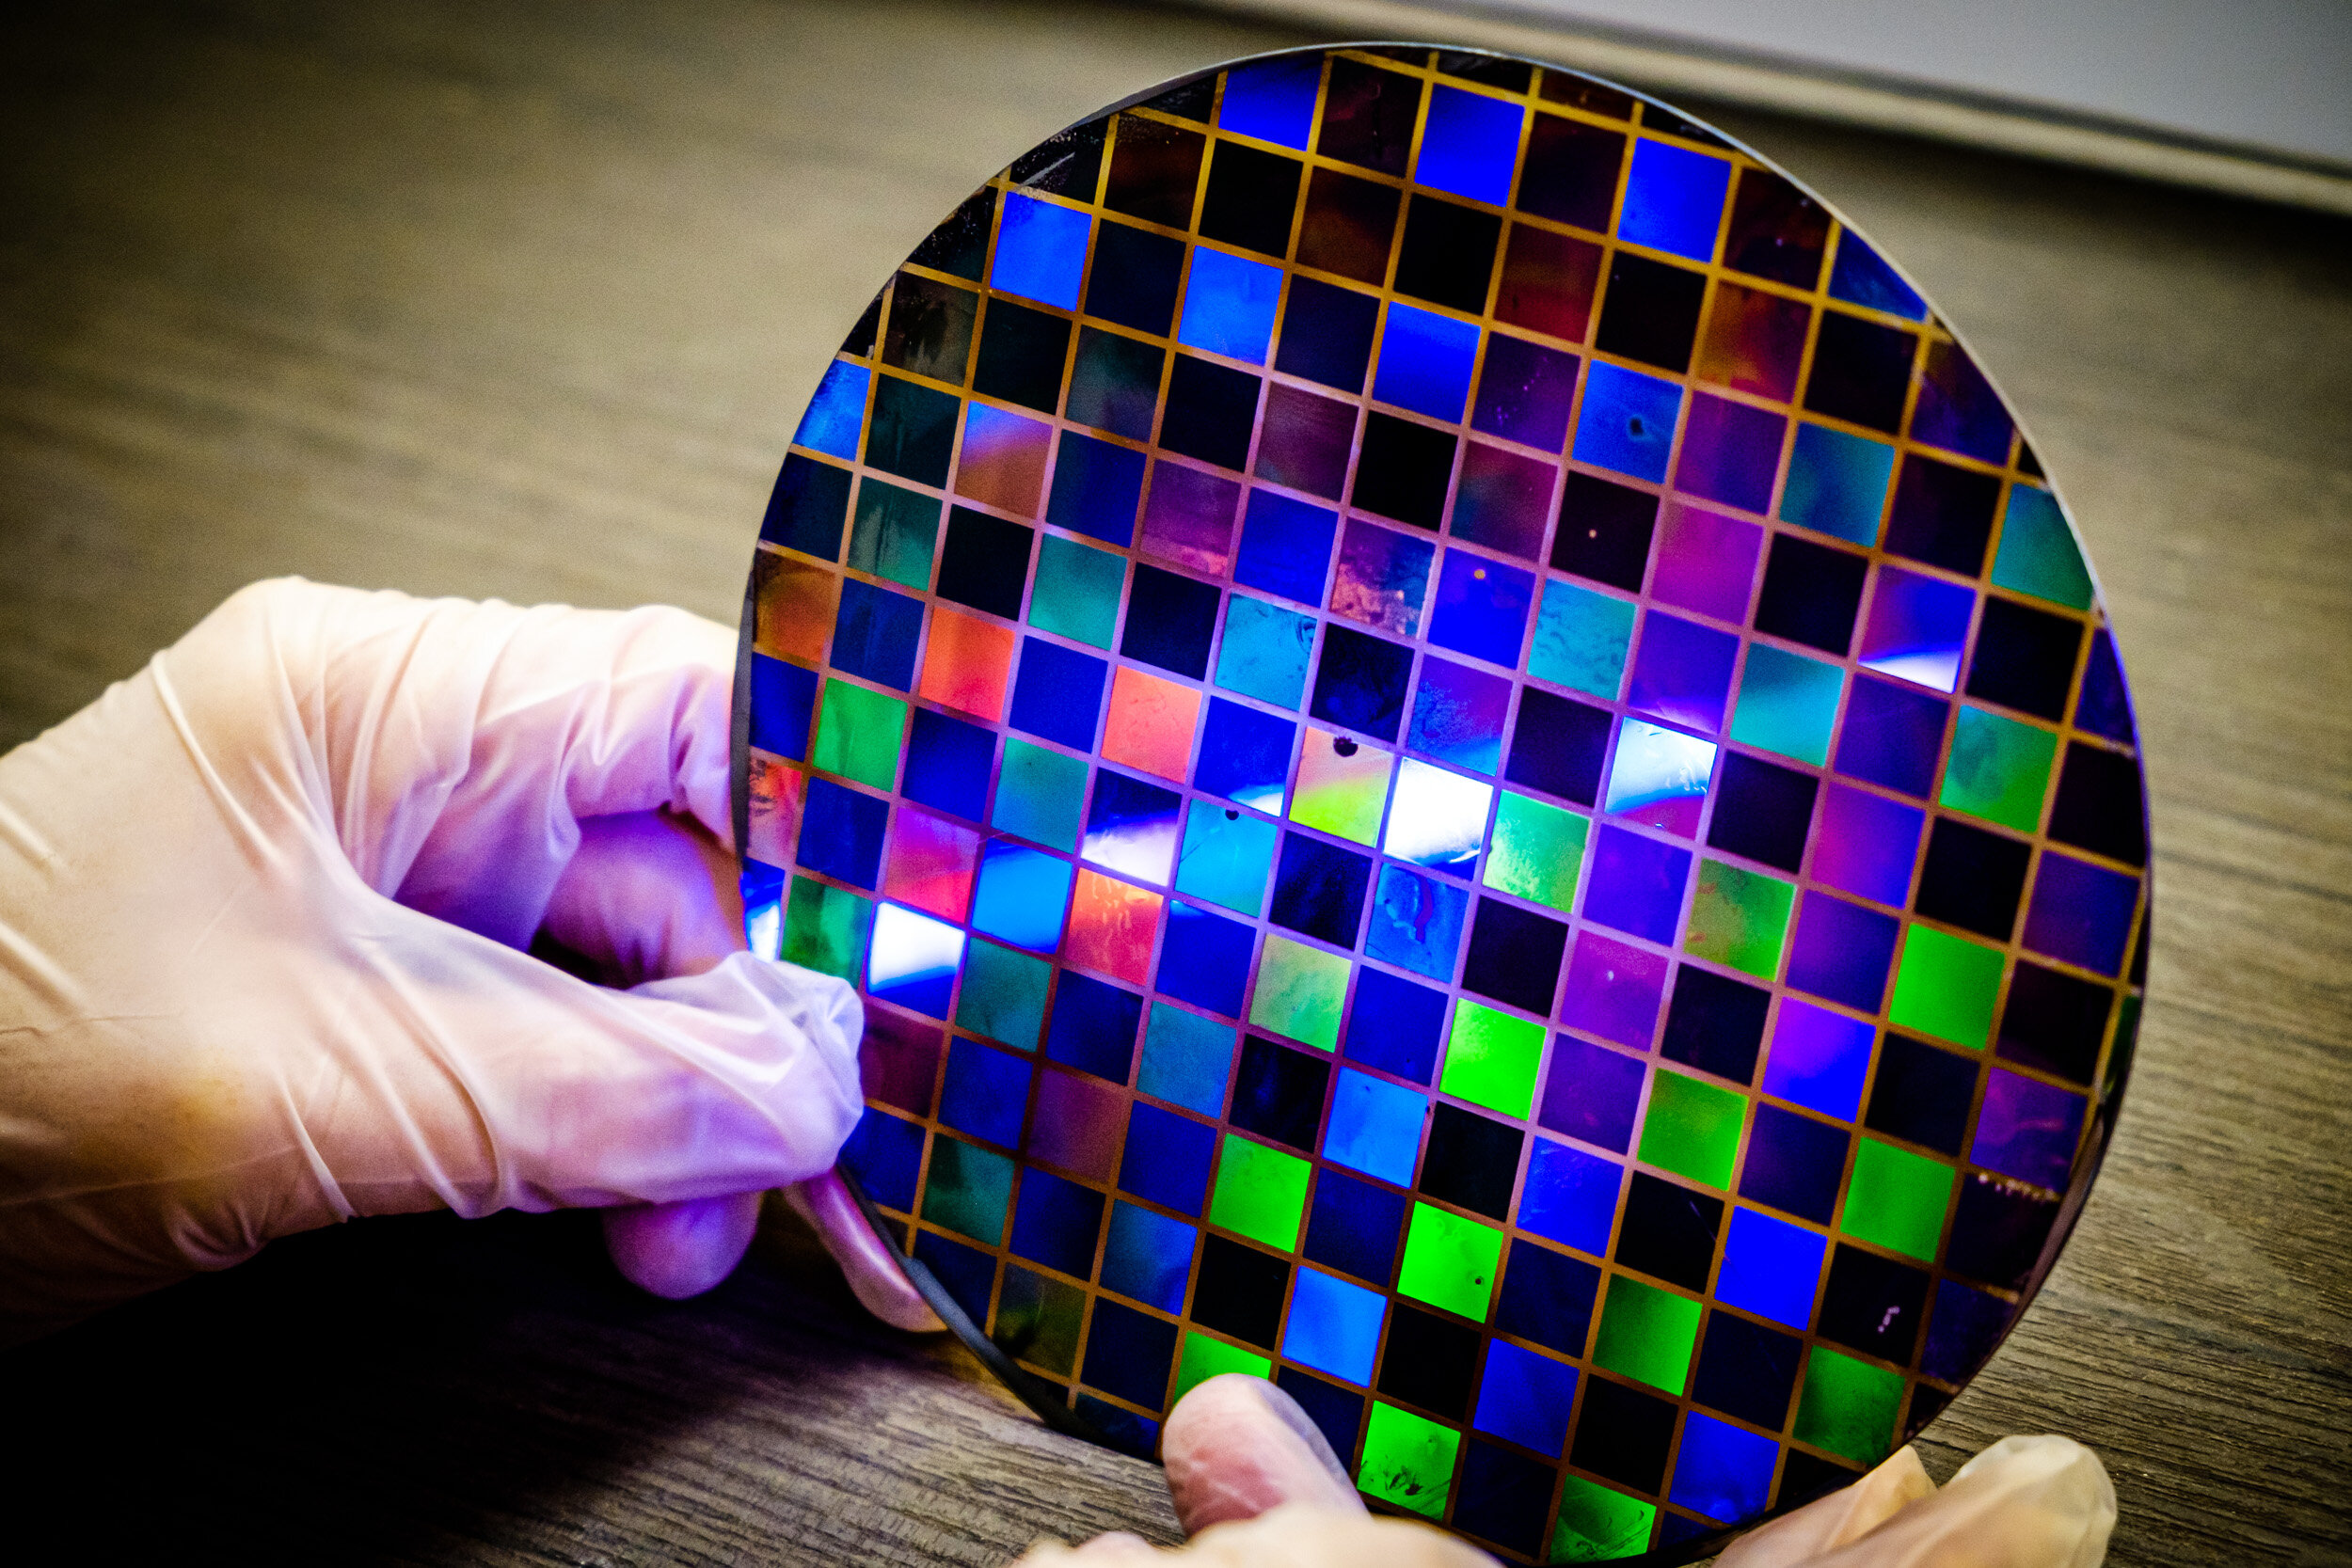 Scientists devise new technique to increase chip yield from semiconductor wafer